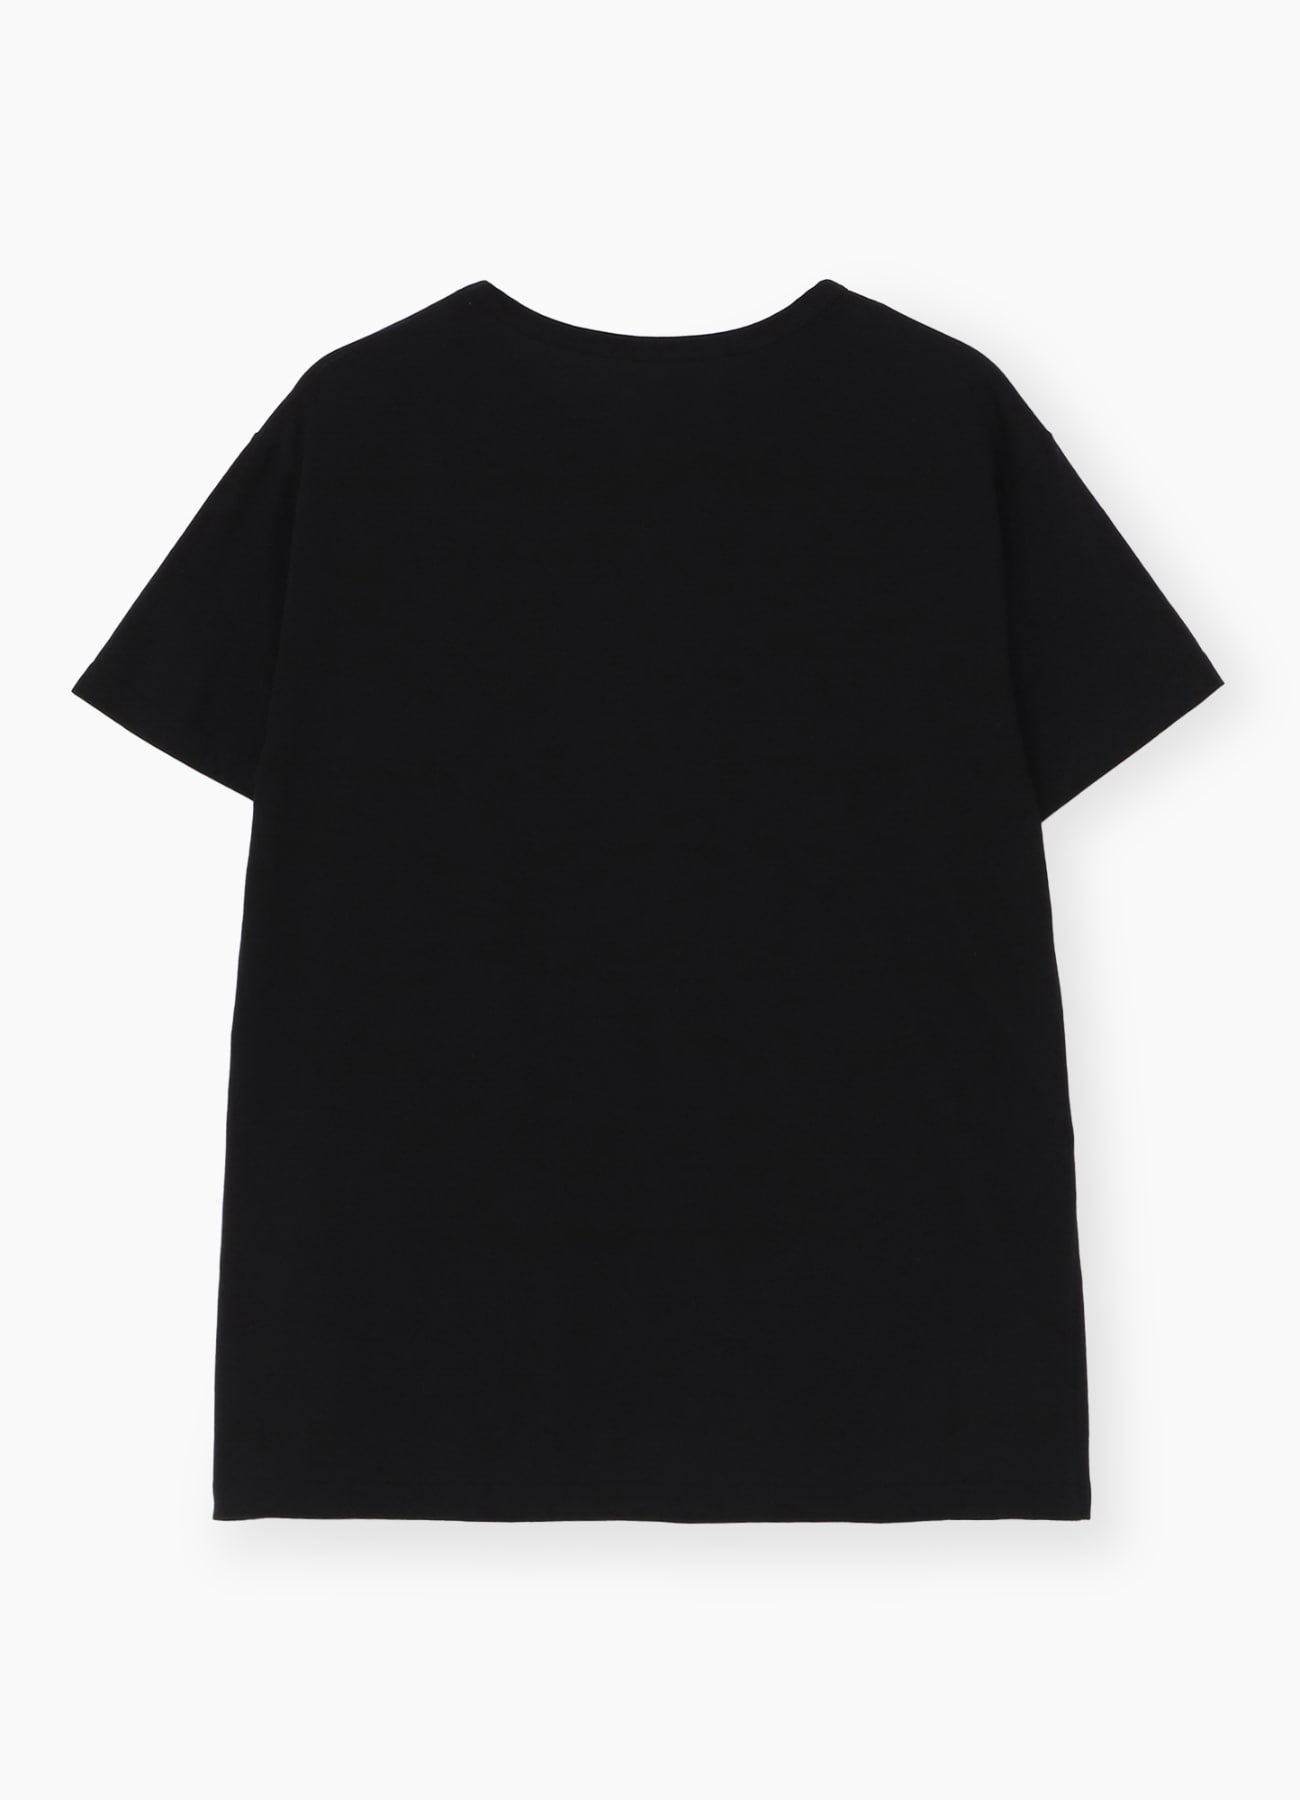 "Shadow" Graphic T-shirt A